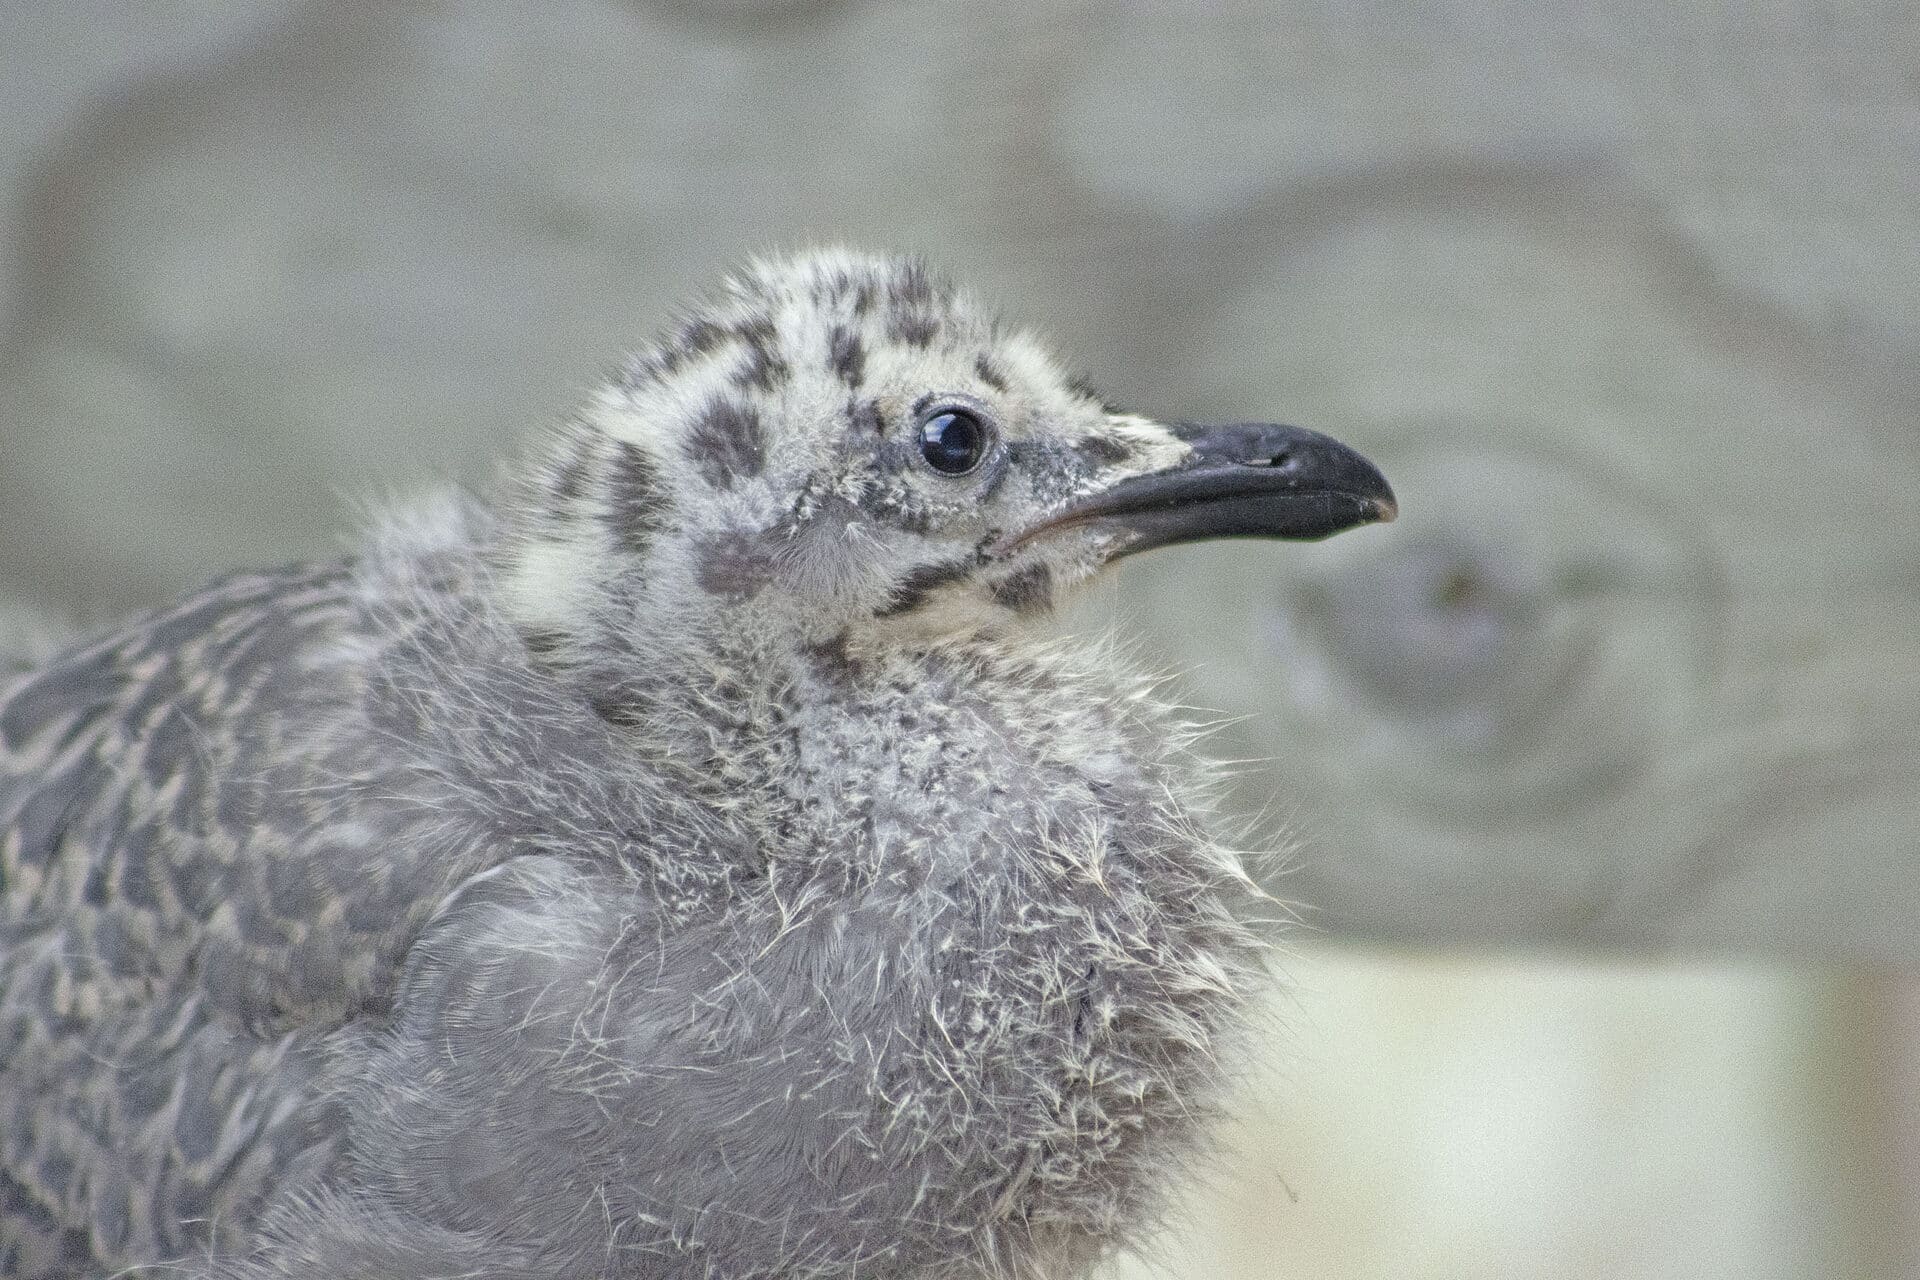 Seagull fledgling, August 15, 2021